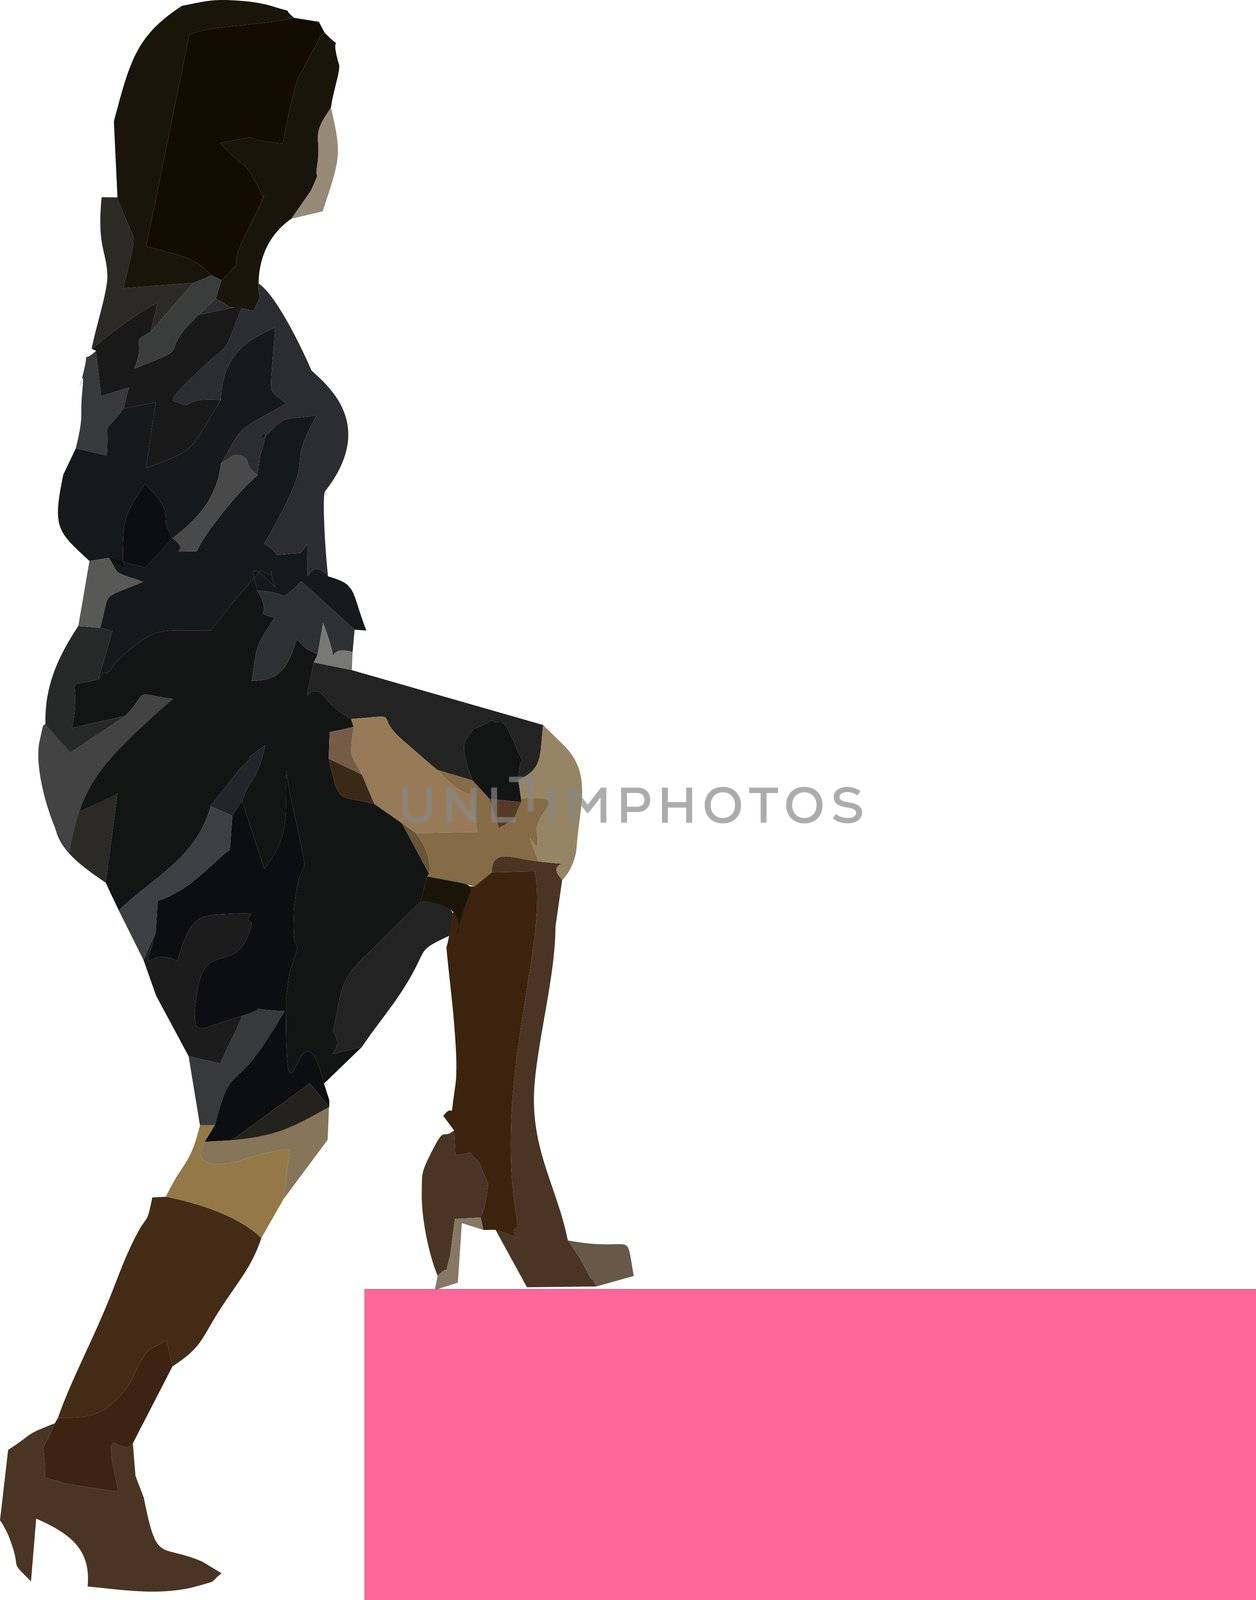 silhouette of a sexy girl climbing a step -  isolated vector illustration